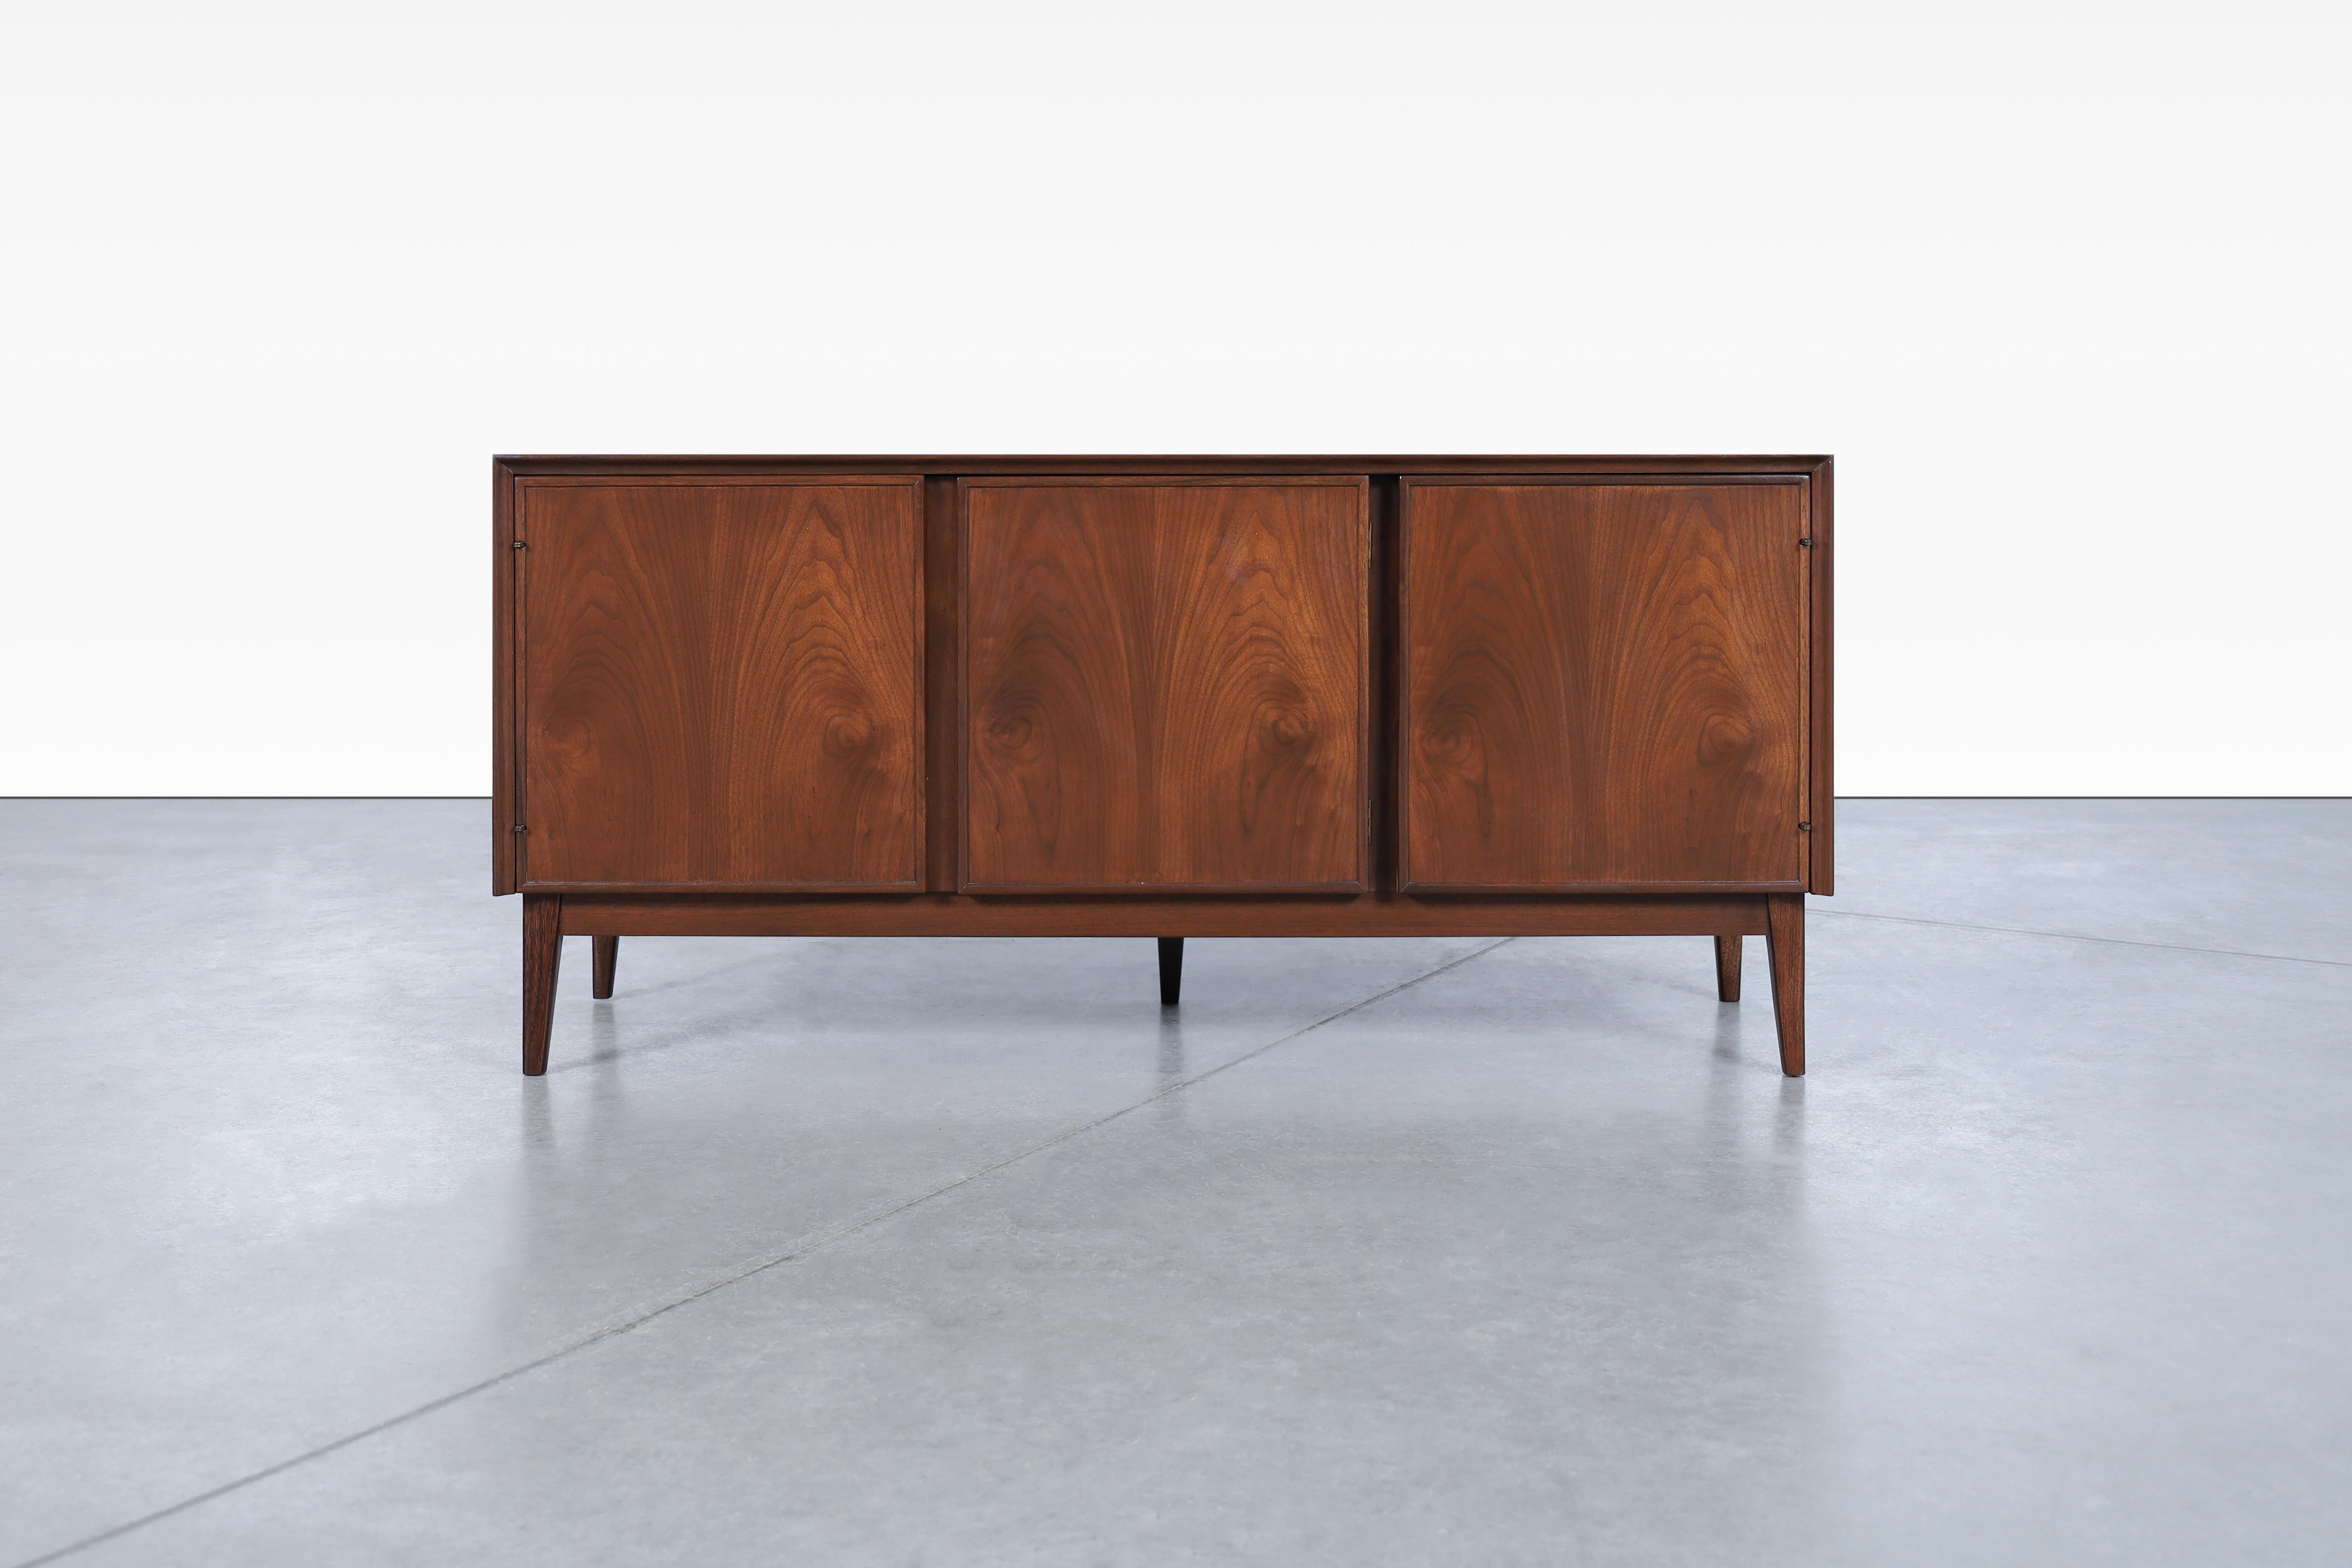 Amazing mid-century modern walnut credenza by Merton L. Gershun for American of Martinsville and manufactured in the United States, circa 1960s. This piece showcases the perfect blend of form and function, embodying the essence of mid-century modern